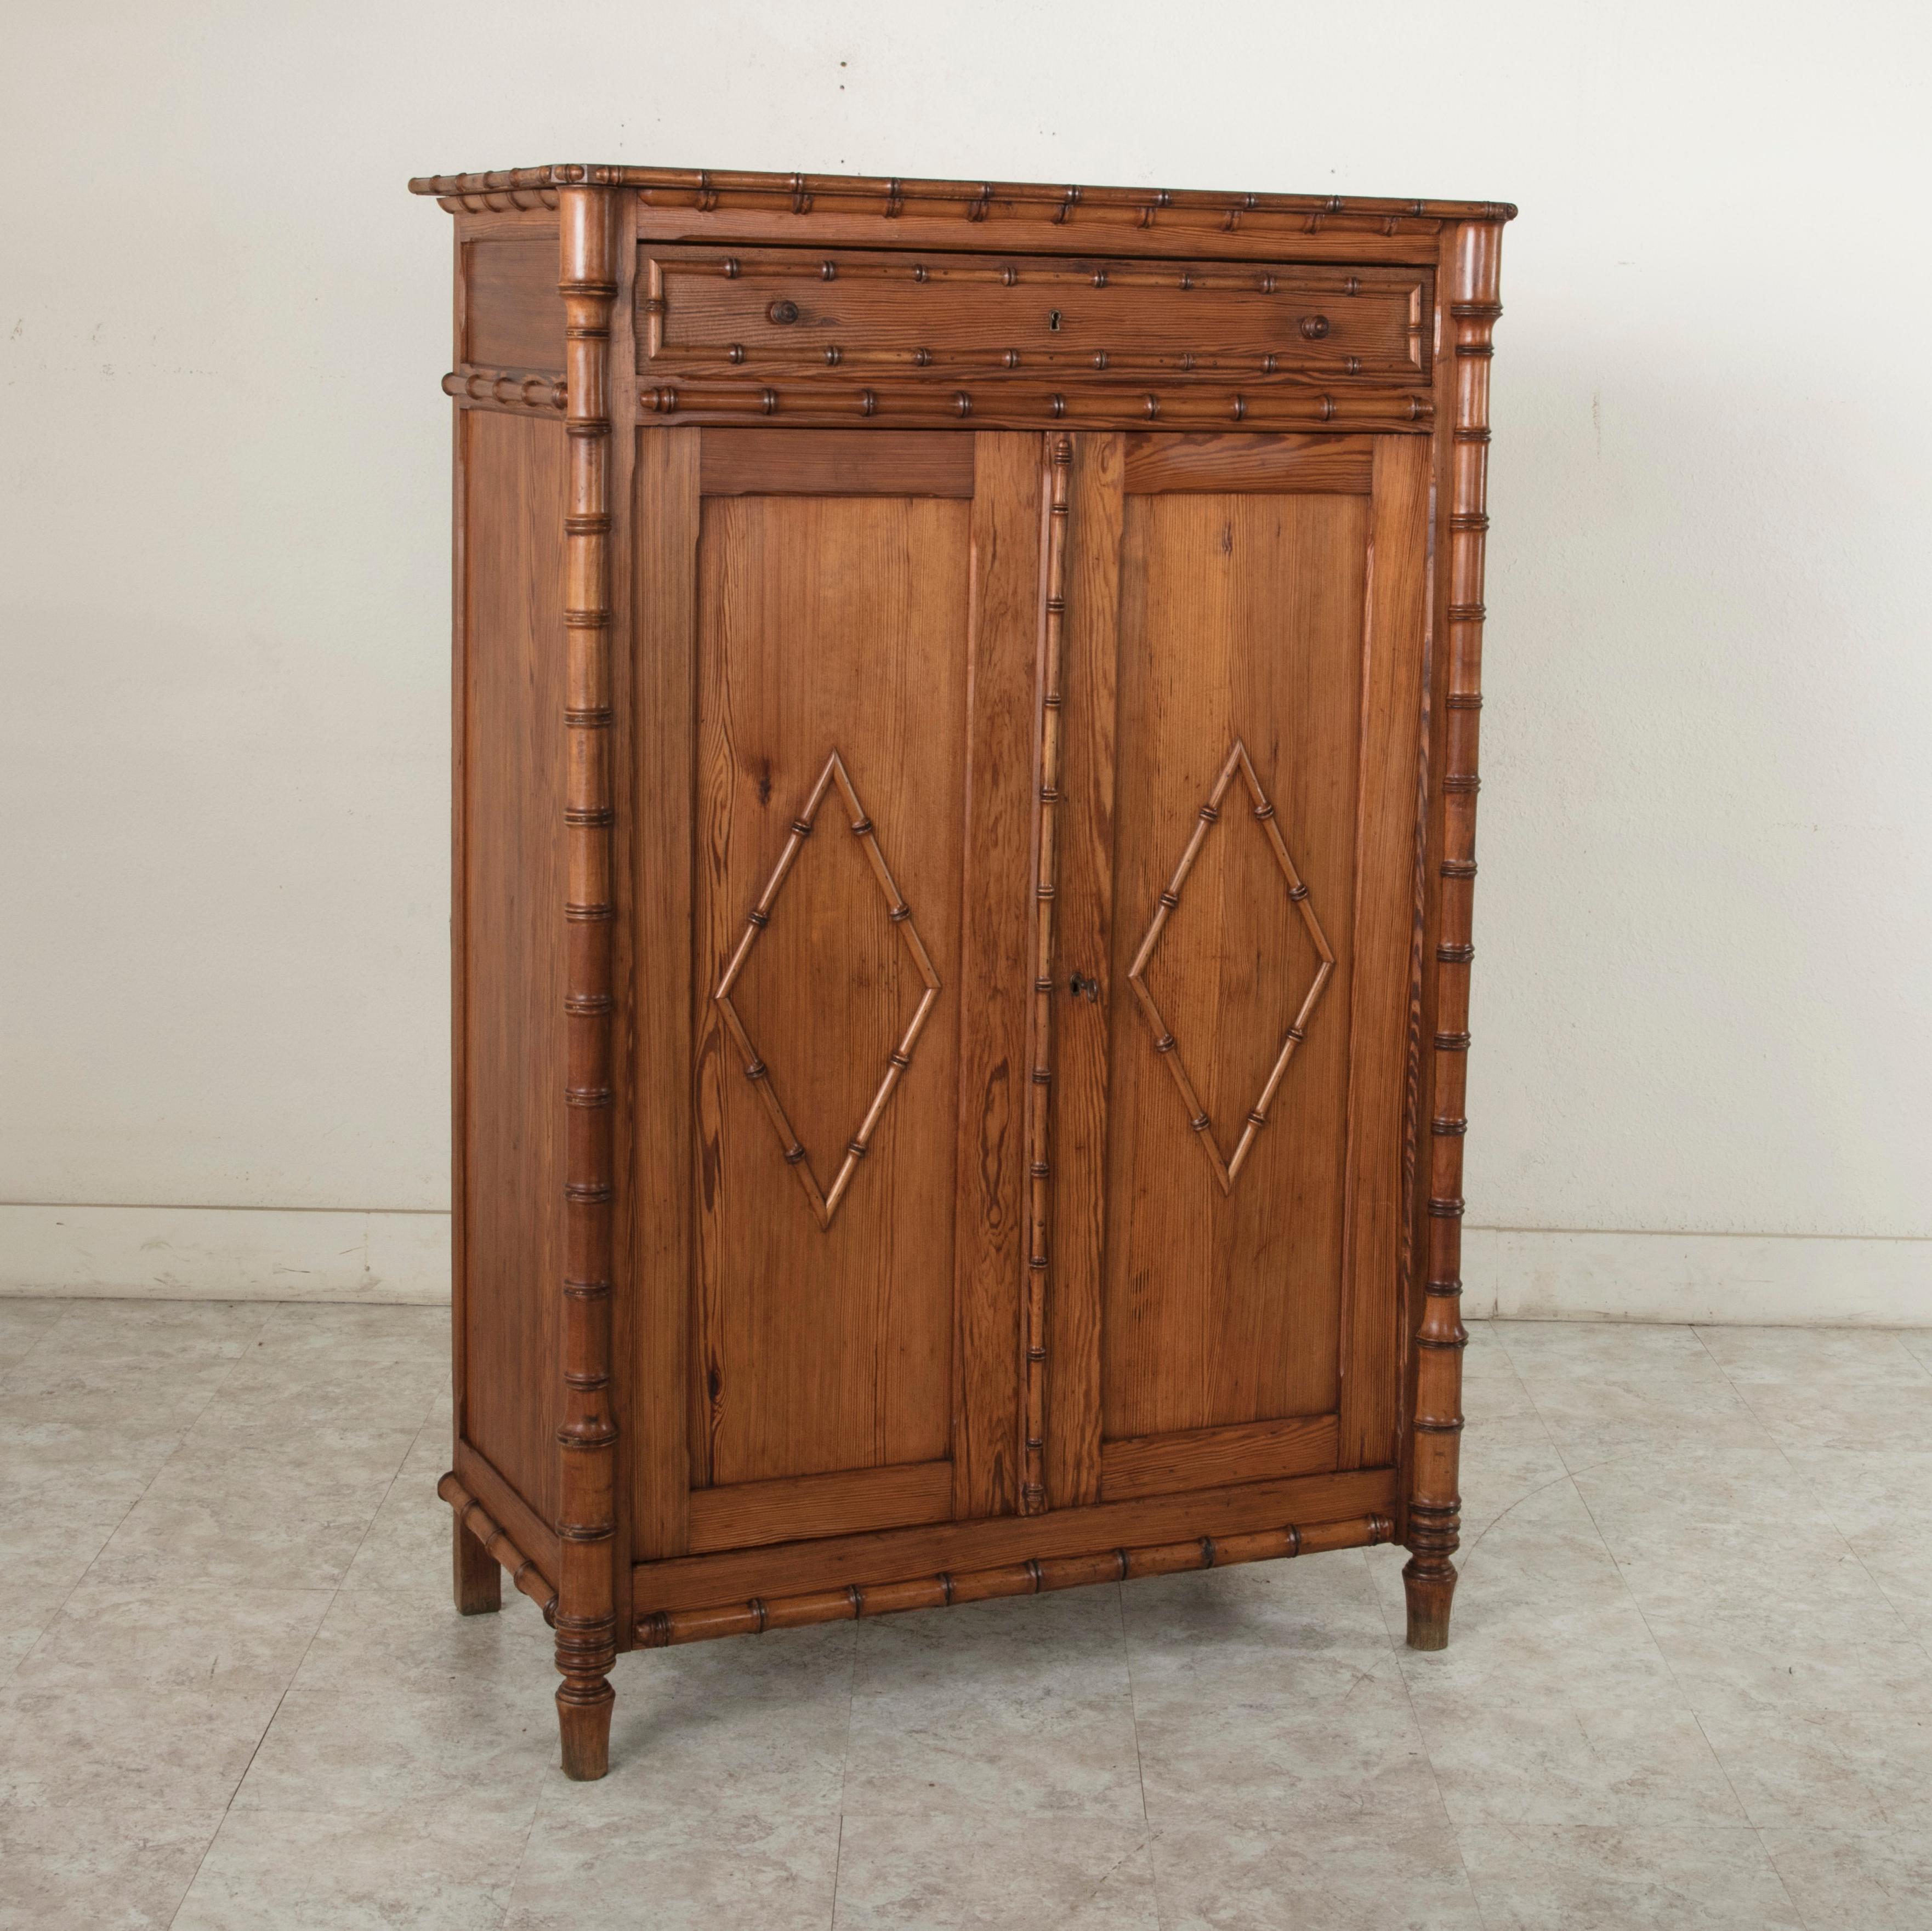 This turn of the 20th century French colonial style pitch pine armoirette features faux bamboo corners and edges constructed of maple. Its two paneled doors are detailed with faux bamboo diamonds and open to reveal an interior with three adjustable